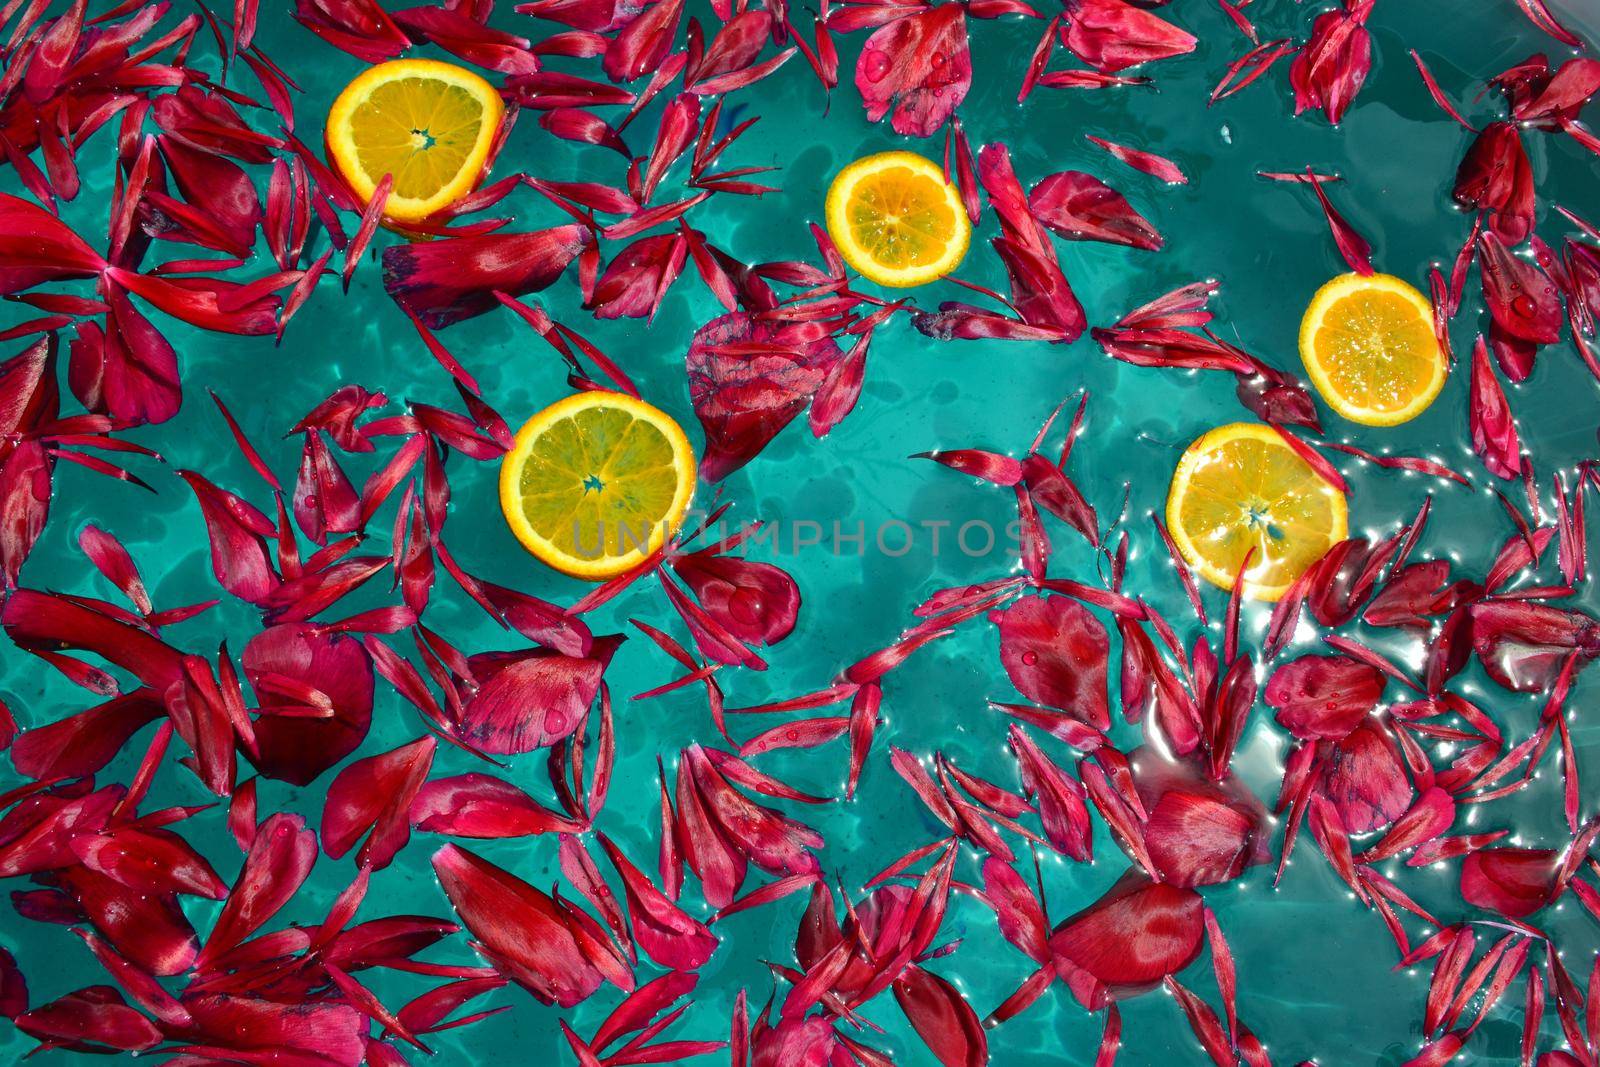 Red peony petals and orange slices on the water by hibrida13